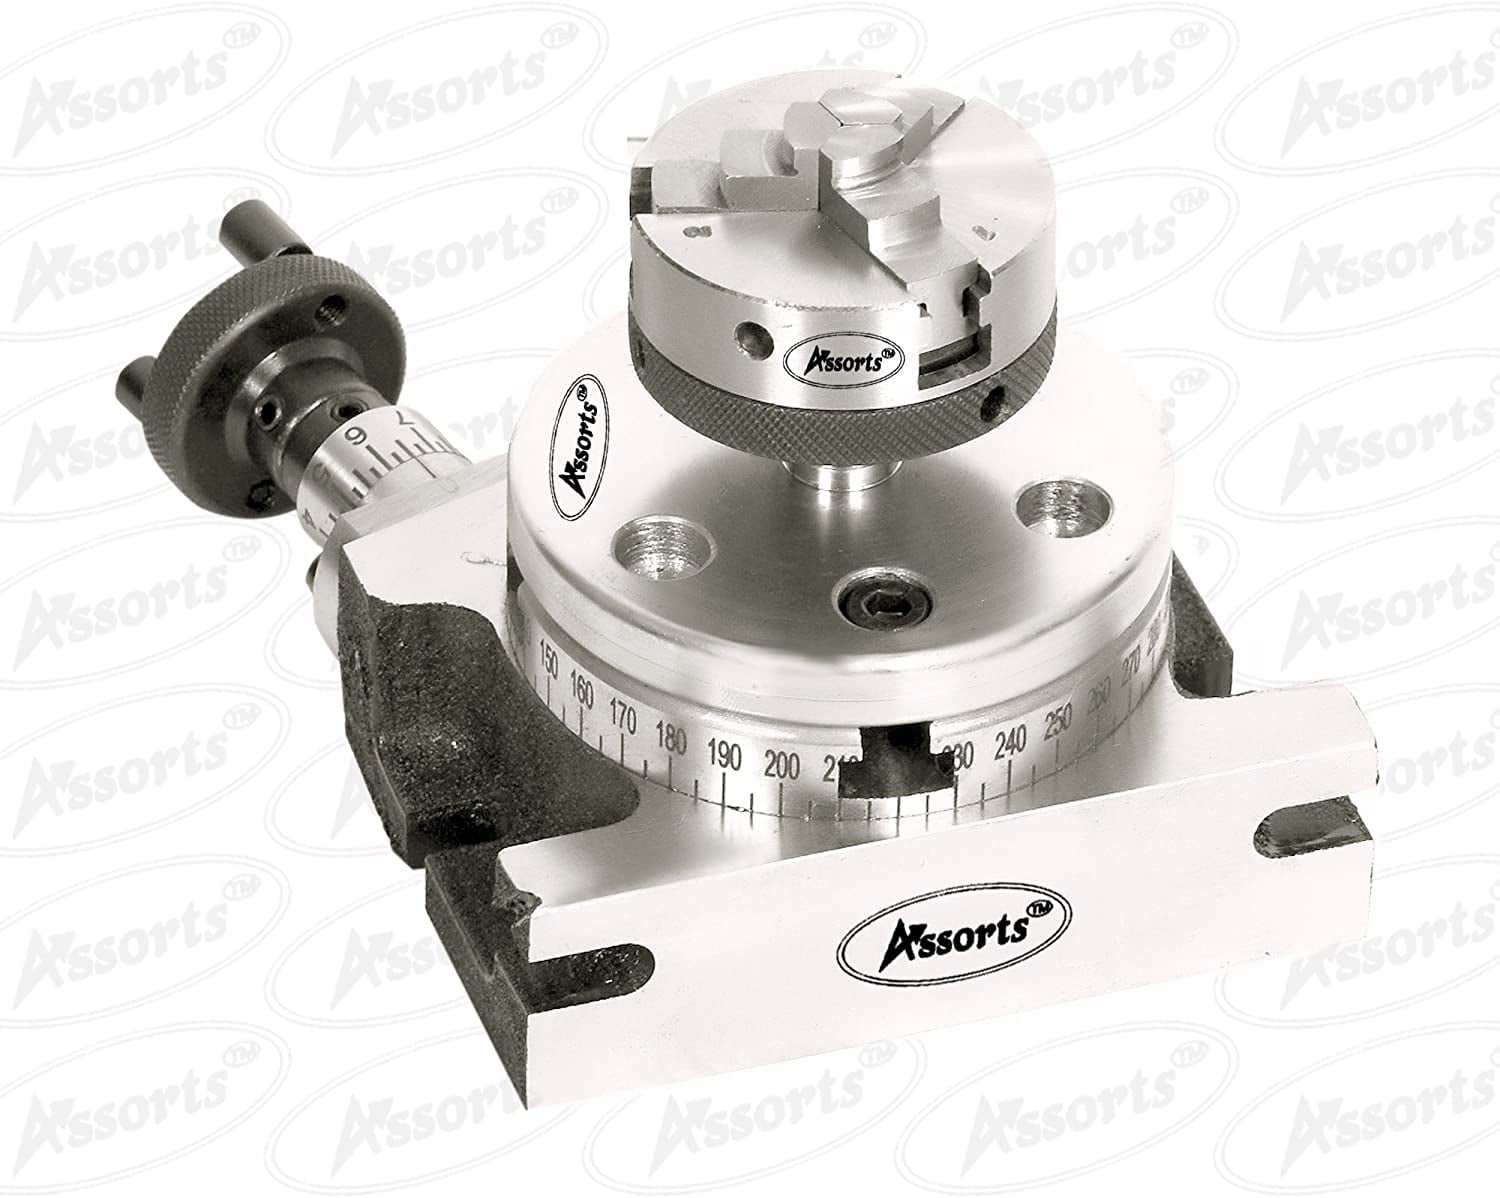 Rotary Table 3" 75mm Horizontal And Vertical 65mm 3 Jaw Chuck & Backplate Kit 